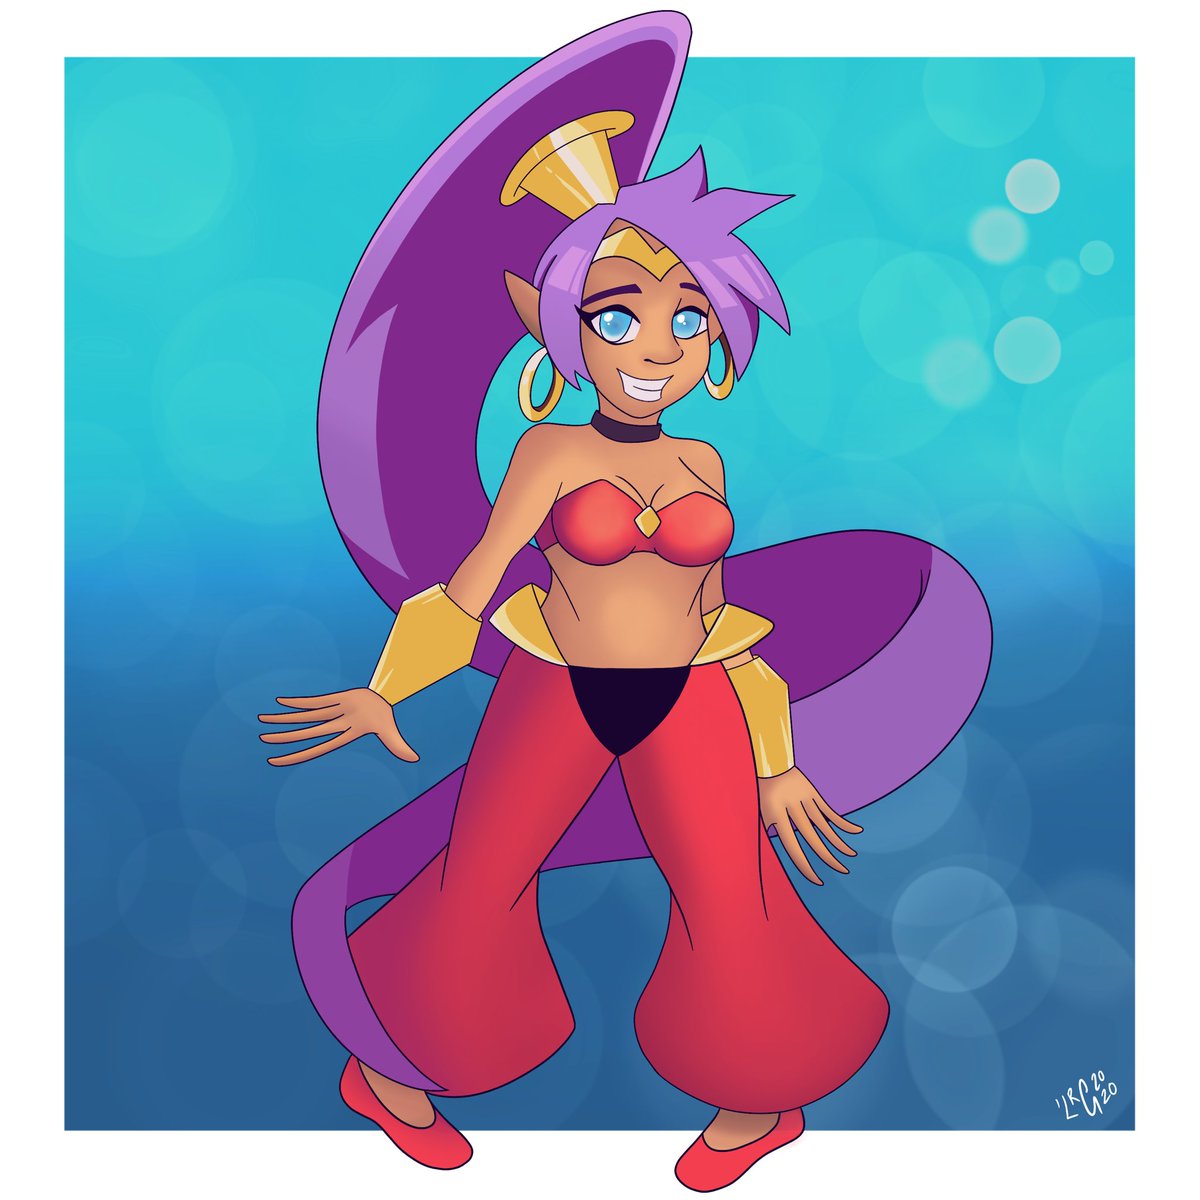 My first attempt at drawing Shantae in her ½ Genie outfit. #shantaehalfgeni...